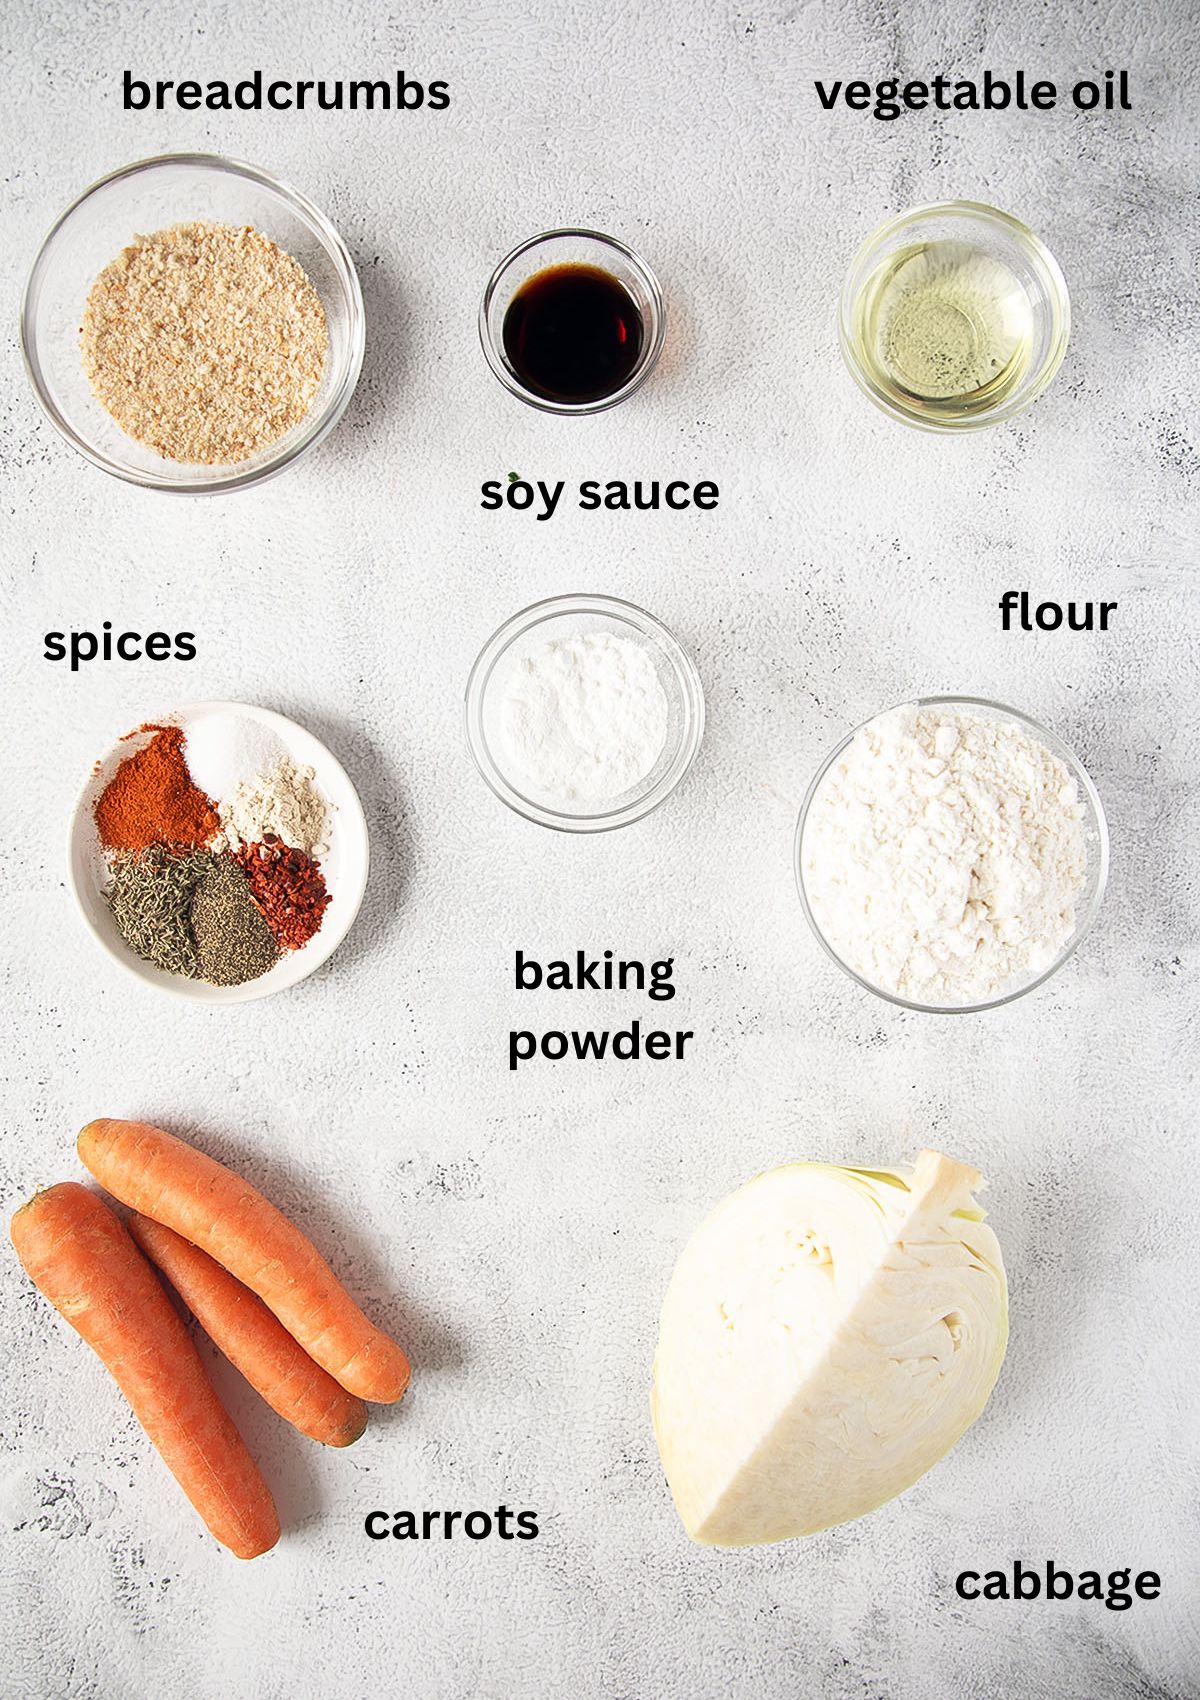 labeled ingredients for making fritters with cabbage, carrots, breadcrumb, flour and spices on the table.